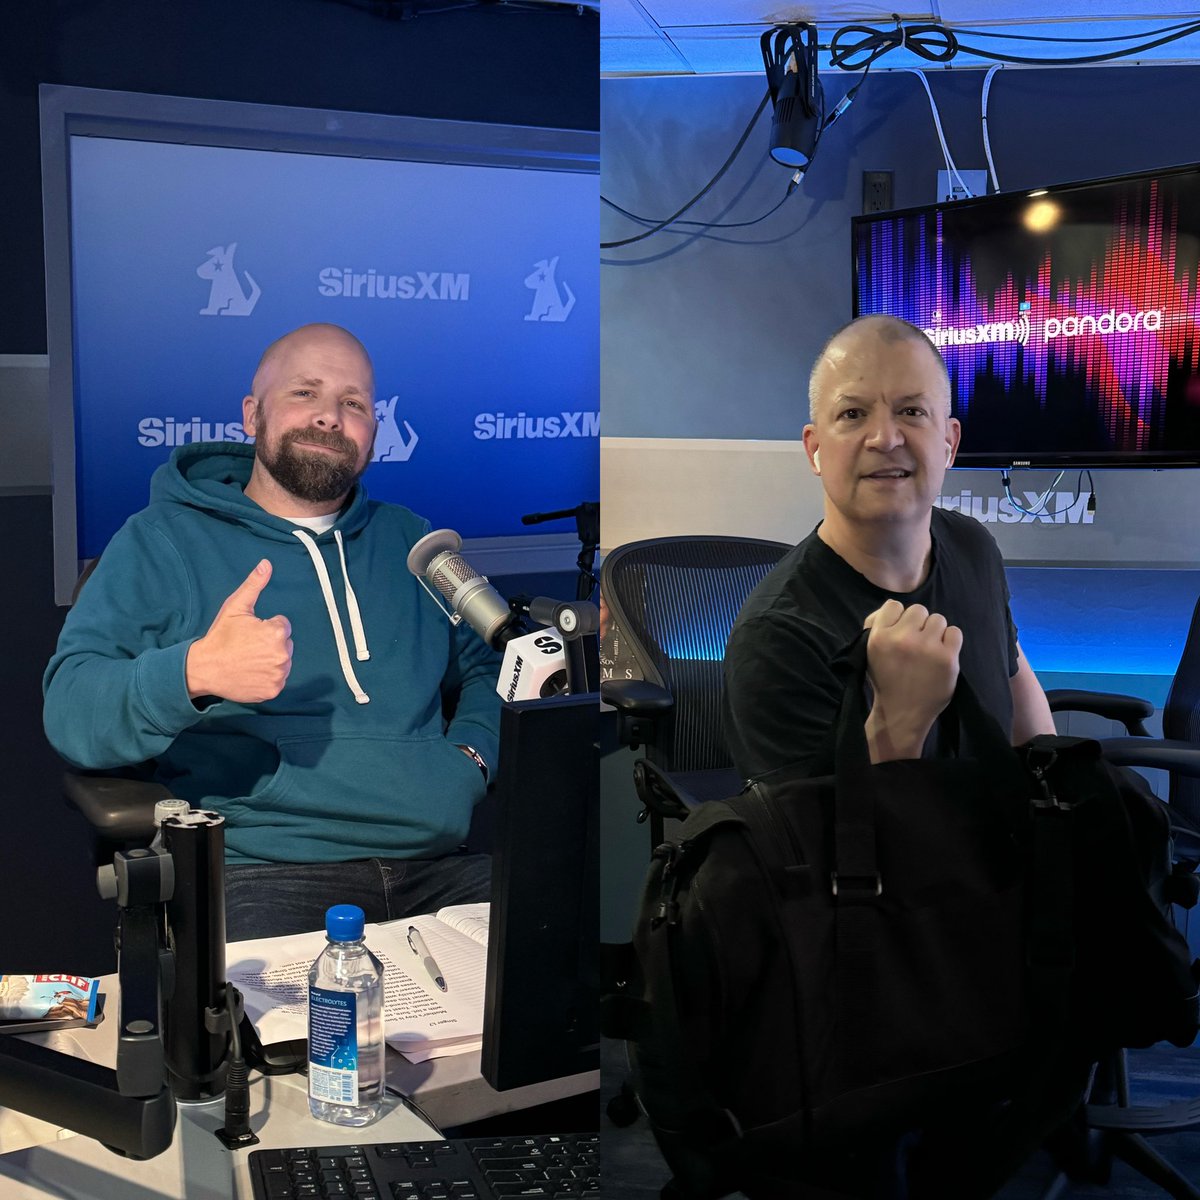 Welcome to another week of #JimAndSam on @SIRIUSXM 103!